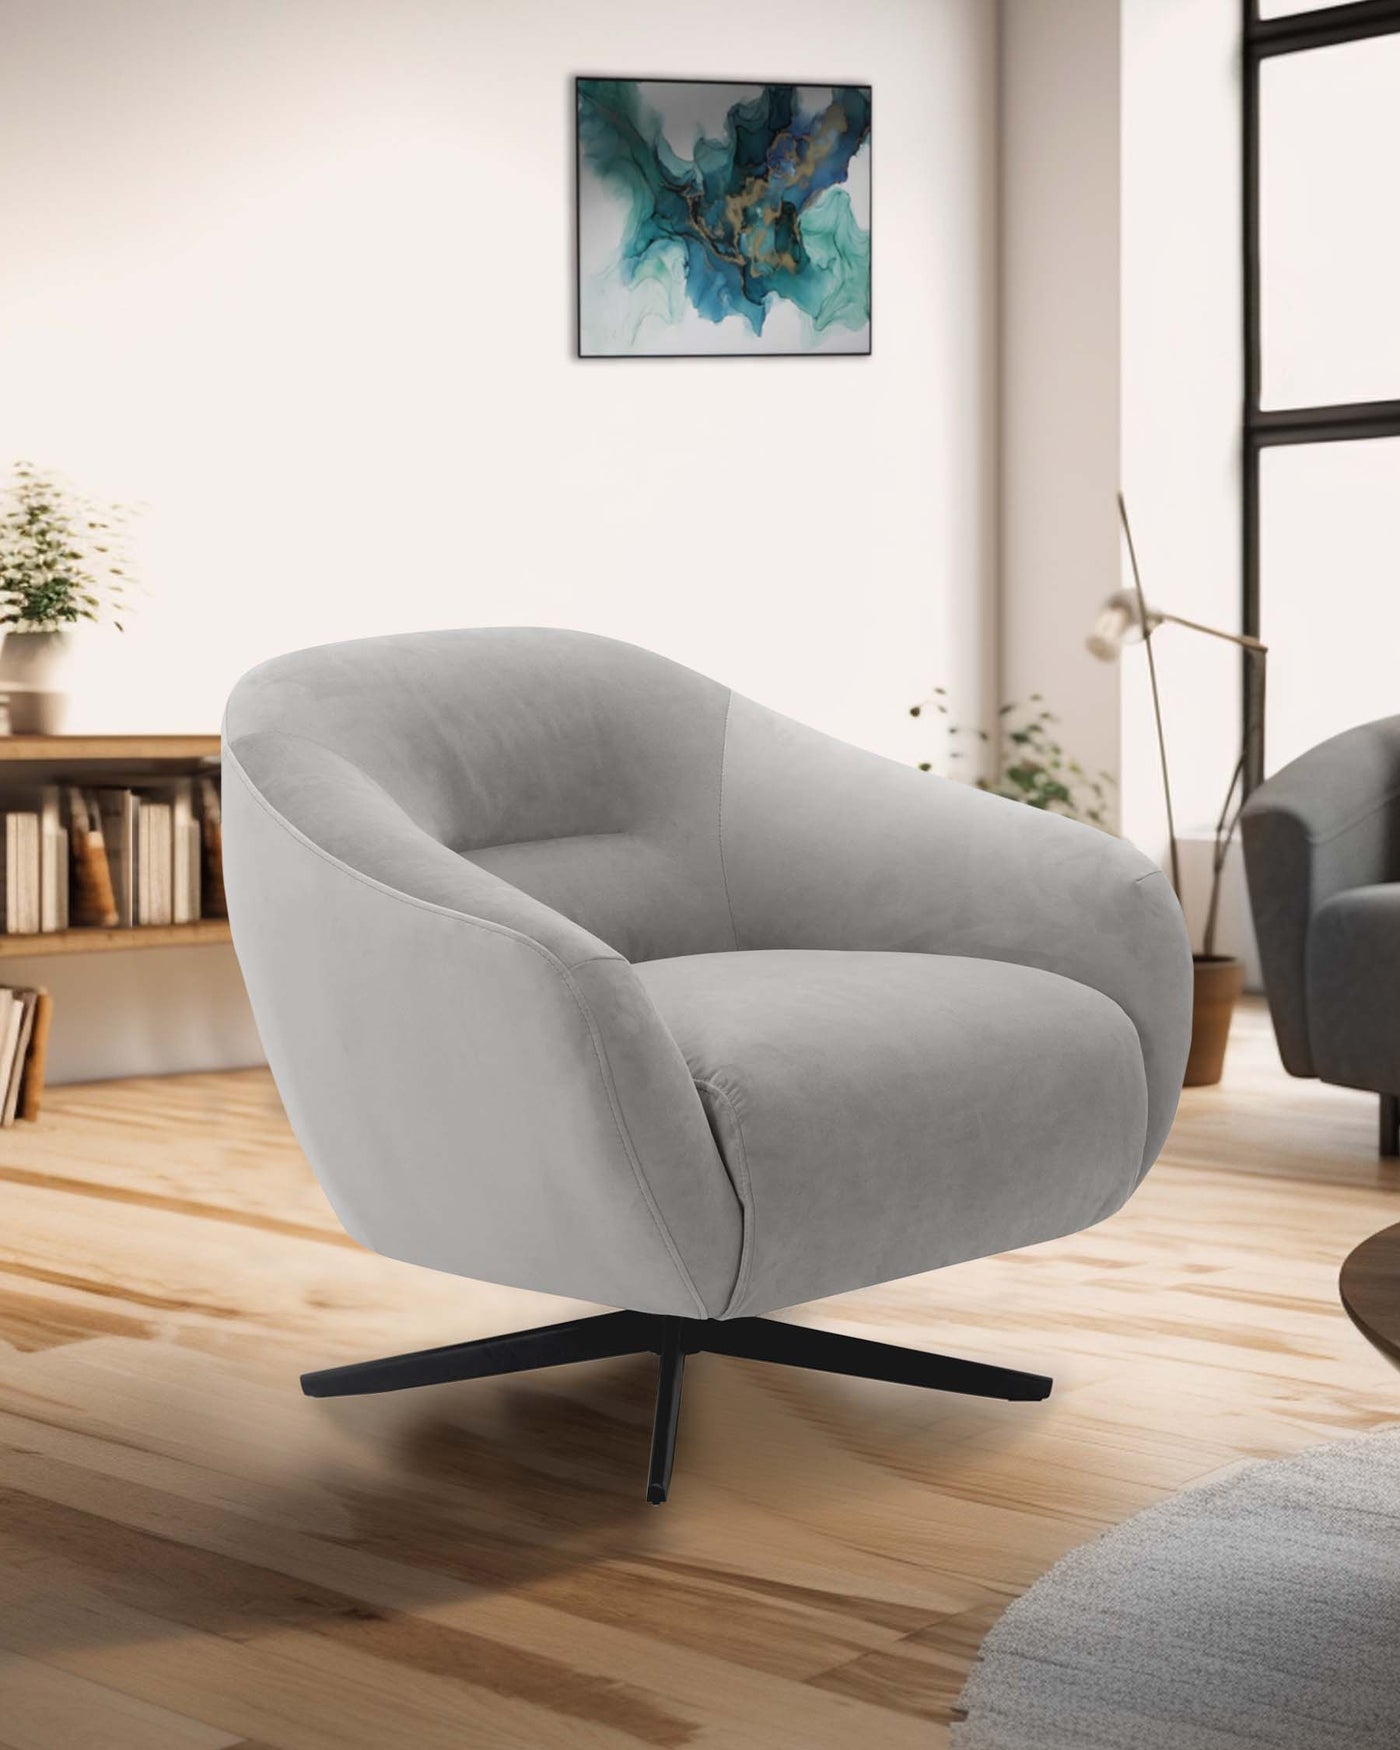 A contemporary light grey armchair with a unique curved design and a four-pronged black metal base, positioned on a wooden floor in a modern living room setting.